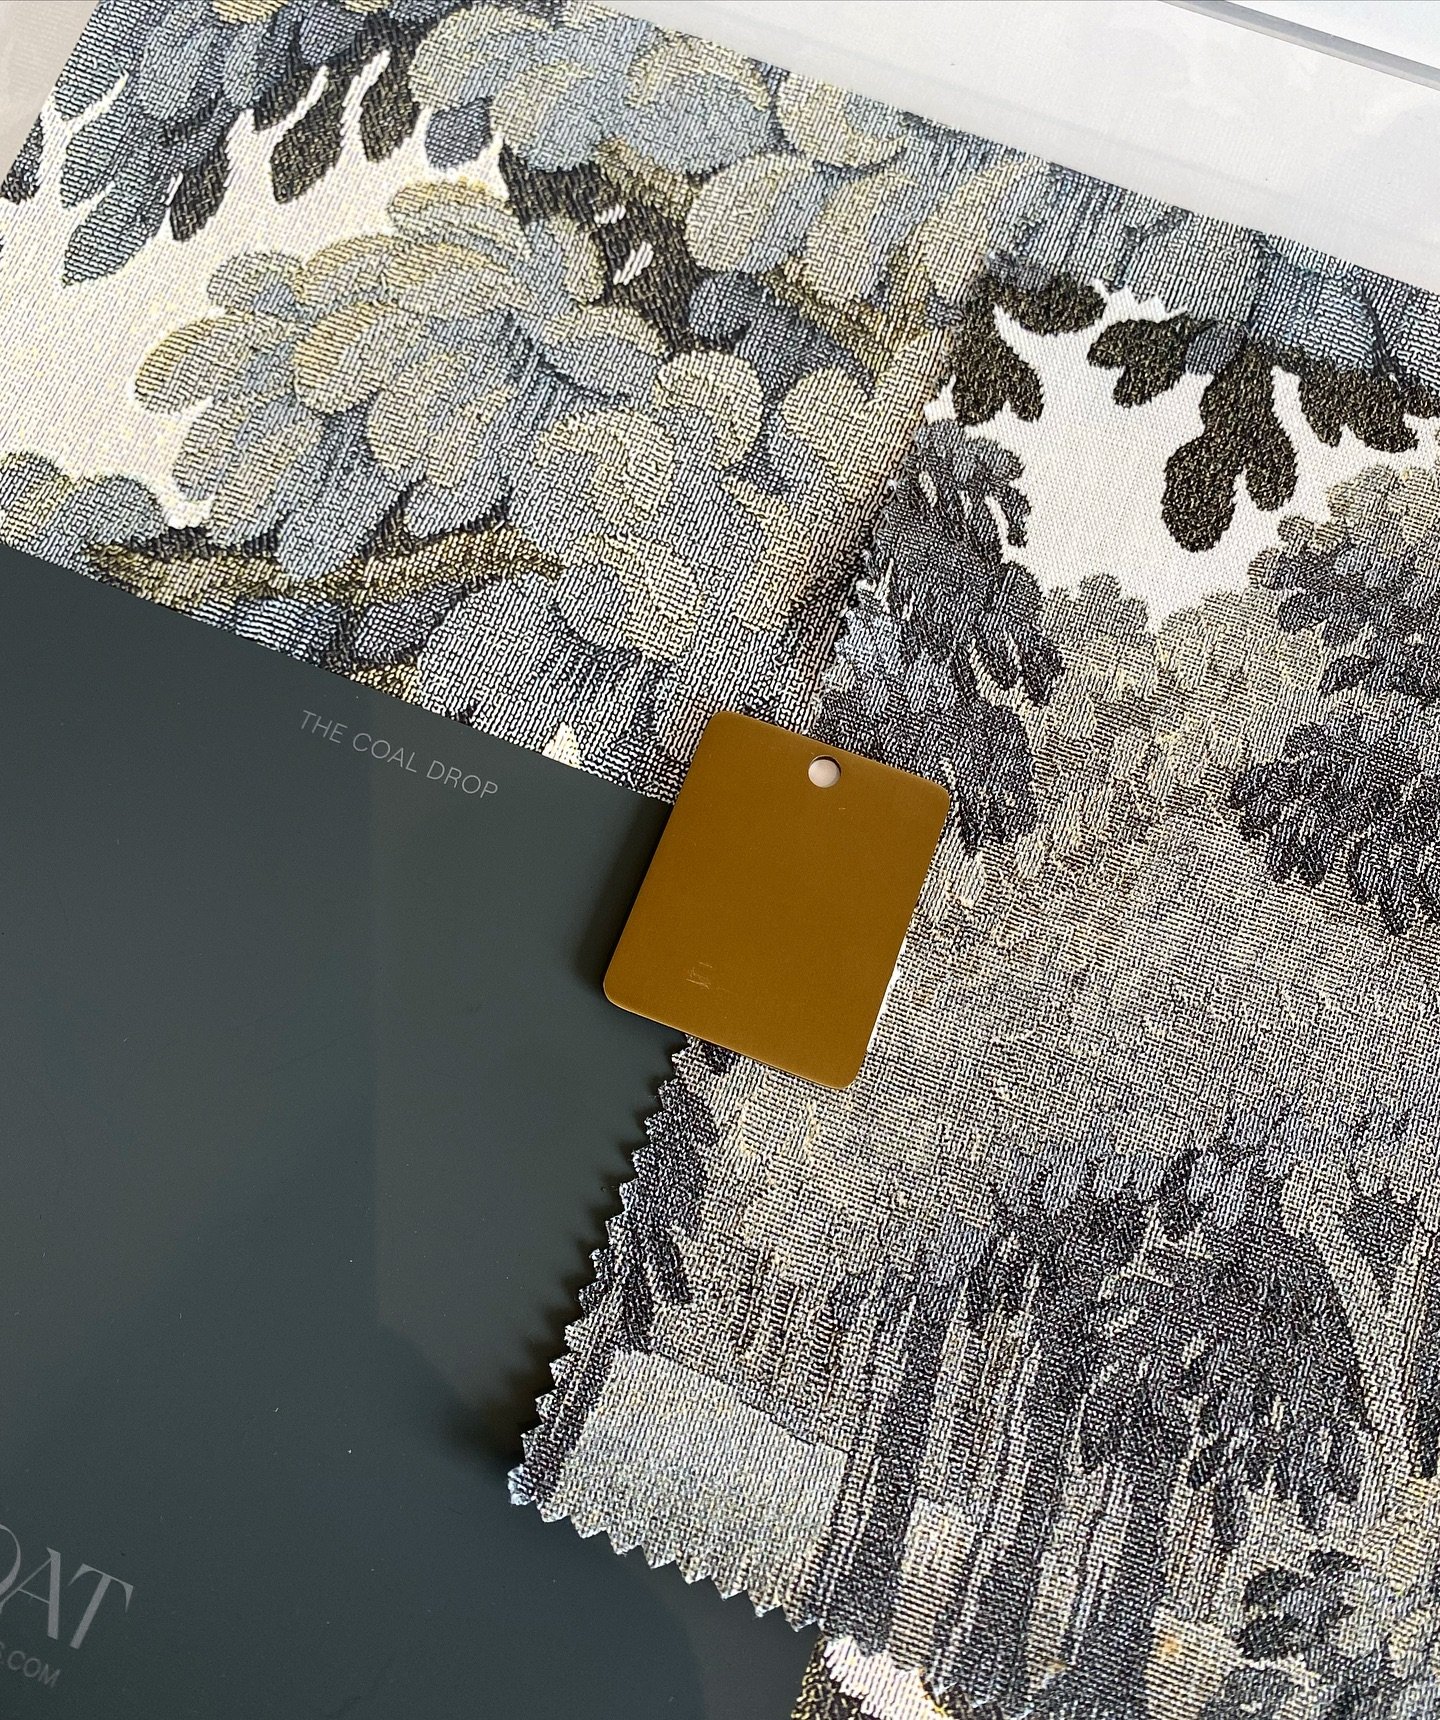 Happy Friday! 

Here&rsquo;s the start of the moodboard for an upcoming residential project&hellip; we&rsquo;re already obsessed 🫶🏻

Featuring @houseofhackney wallpaper and matching fabric for the window dressings. This one&rsquo;s going to be MEGA